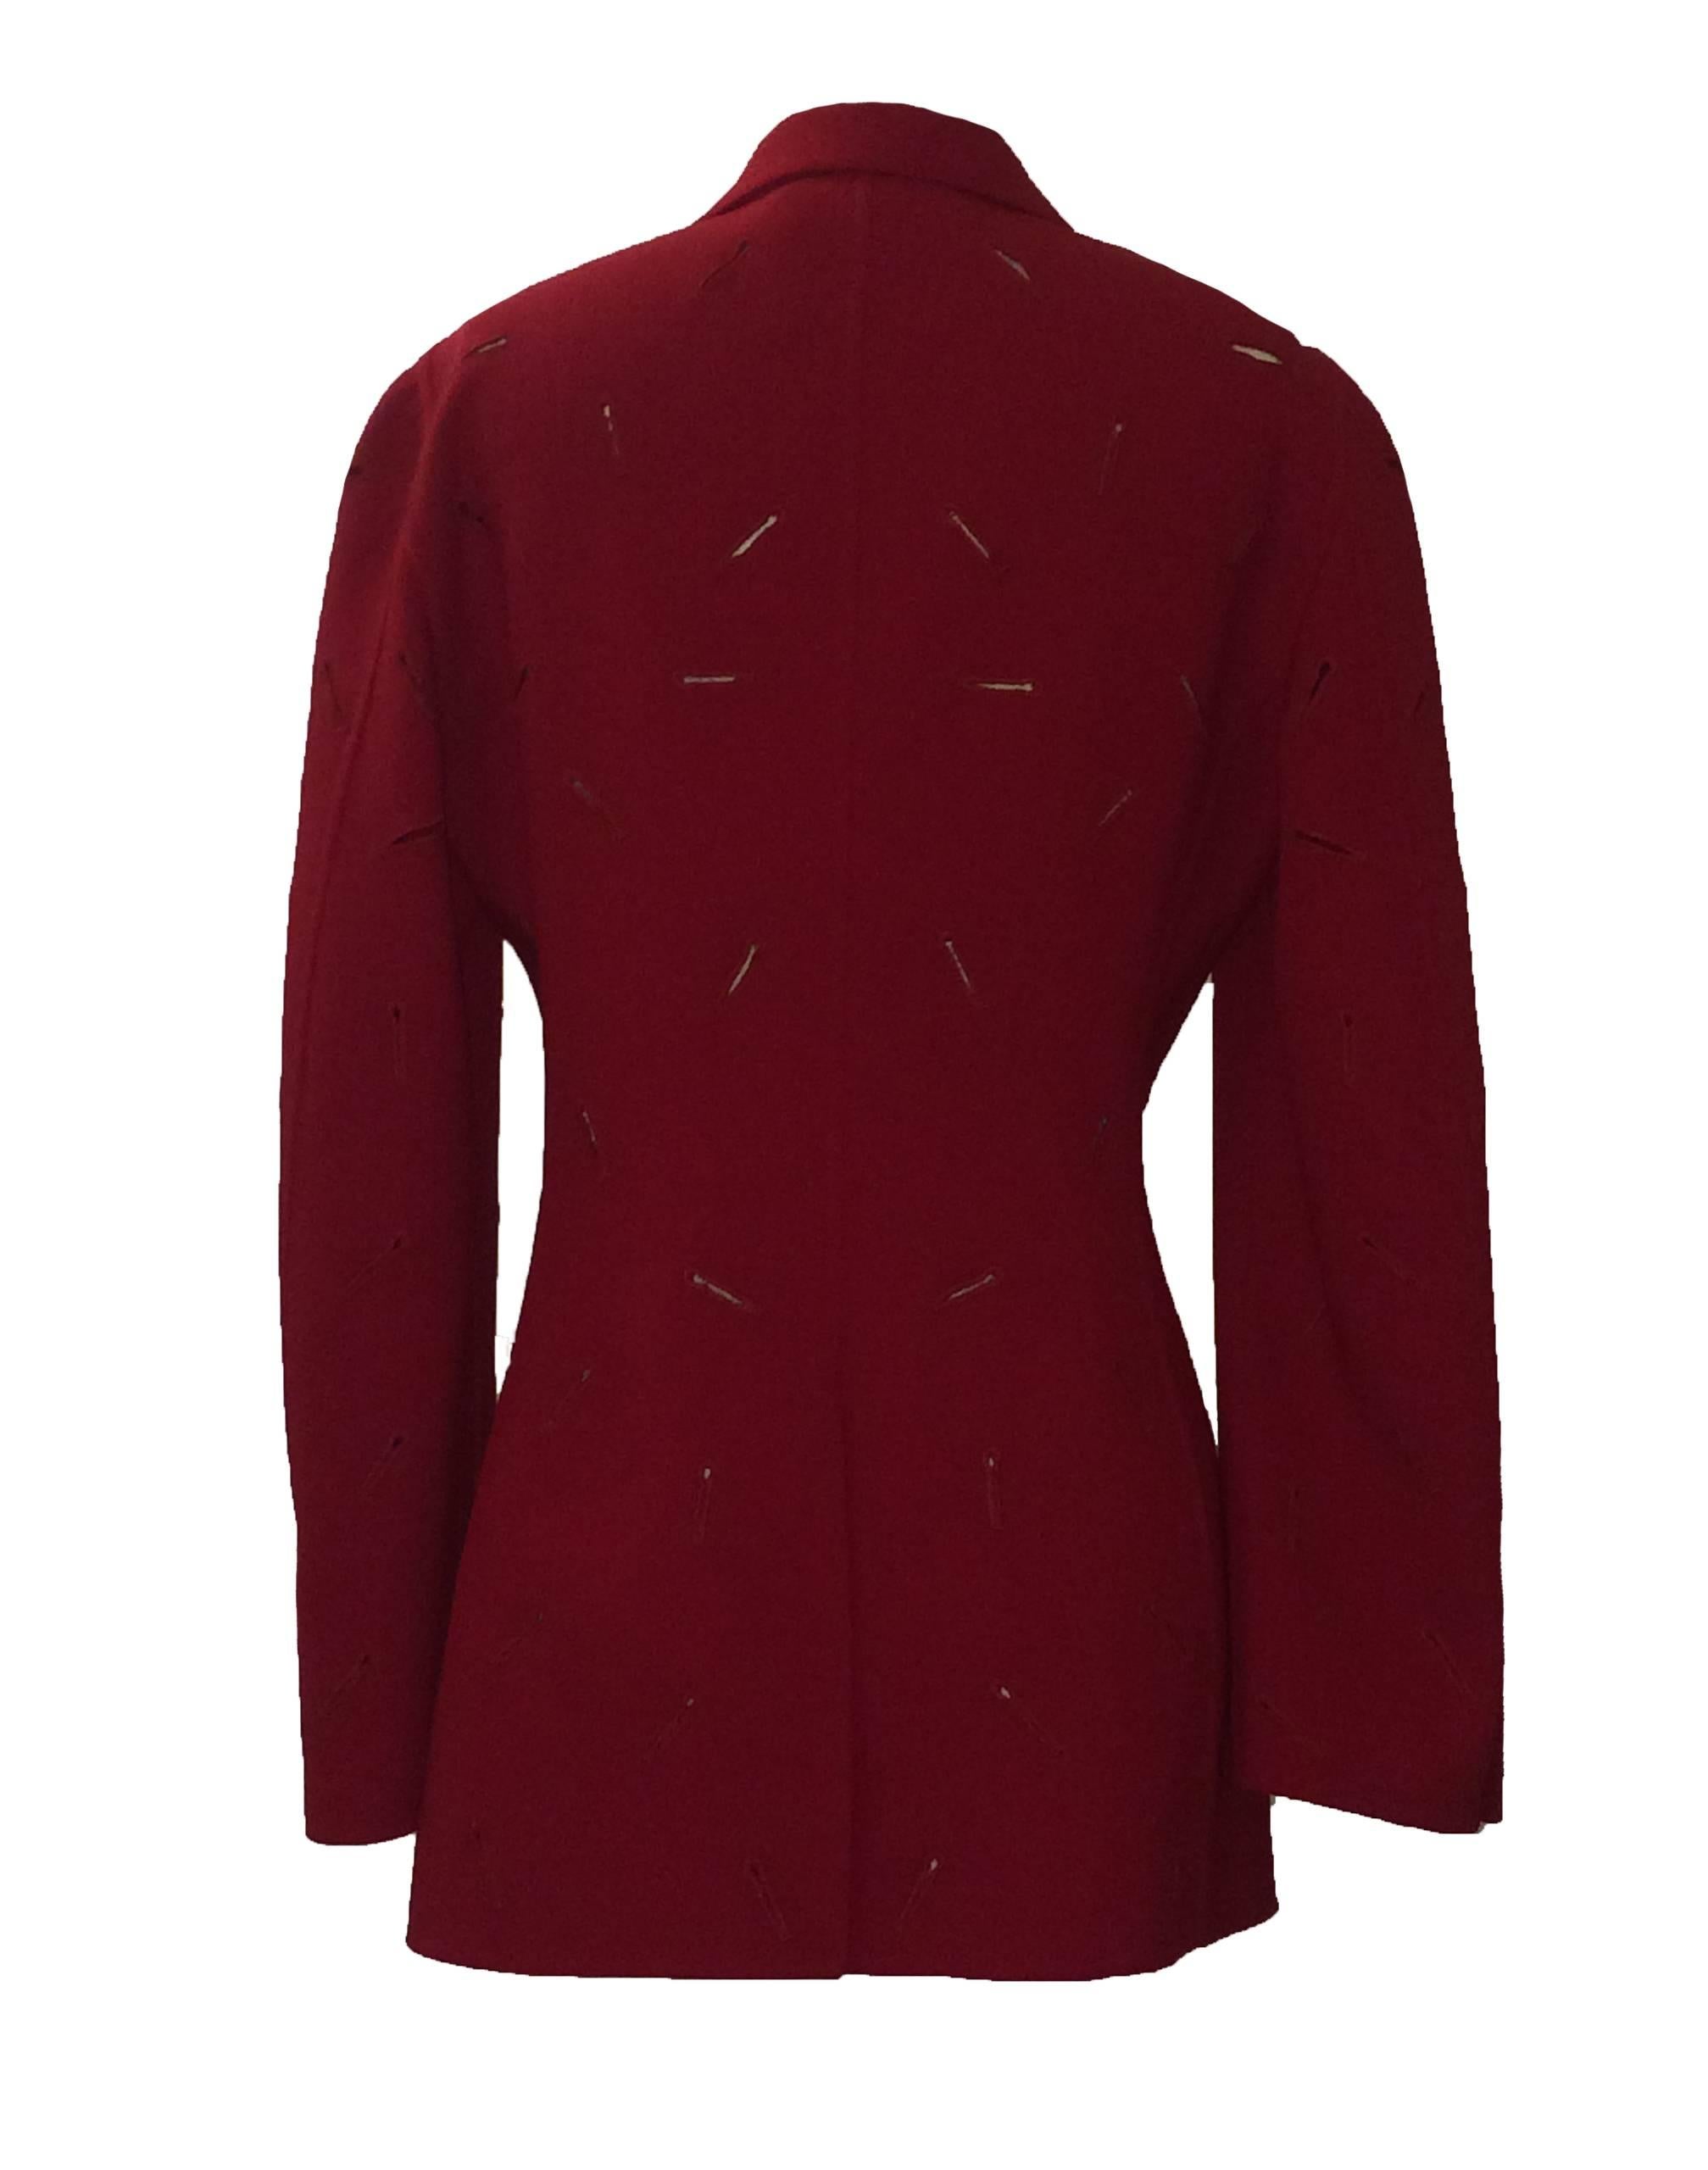 Moschino Couture! 80s single button blazer in red featuring all-over buttonhole design. 

Made in Italy.

100% wool (crepe, not thick wool.) Unlined.

IT 46, US 12. Runs small, see measurements.
Chest 38